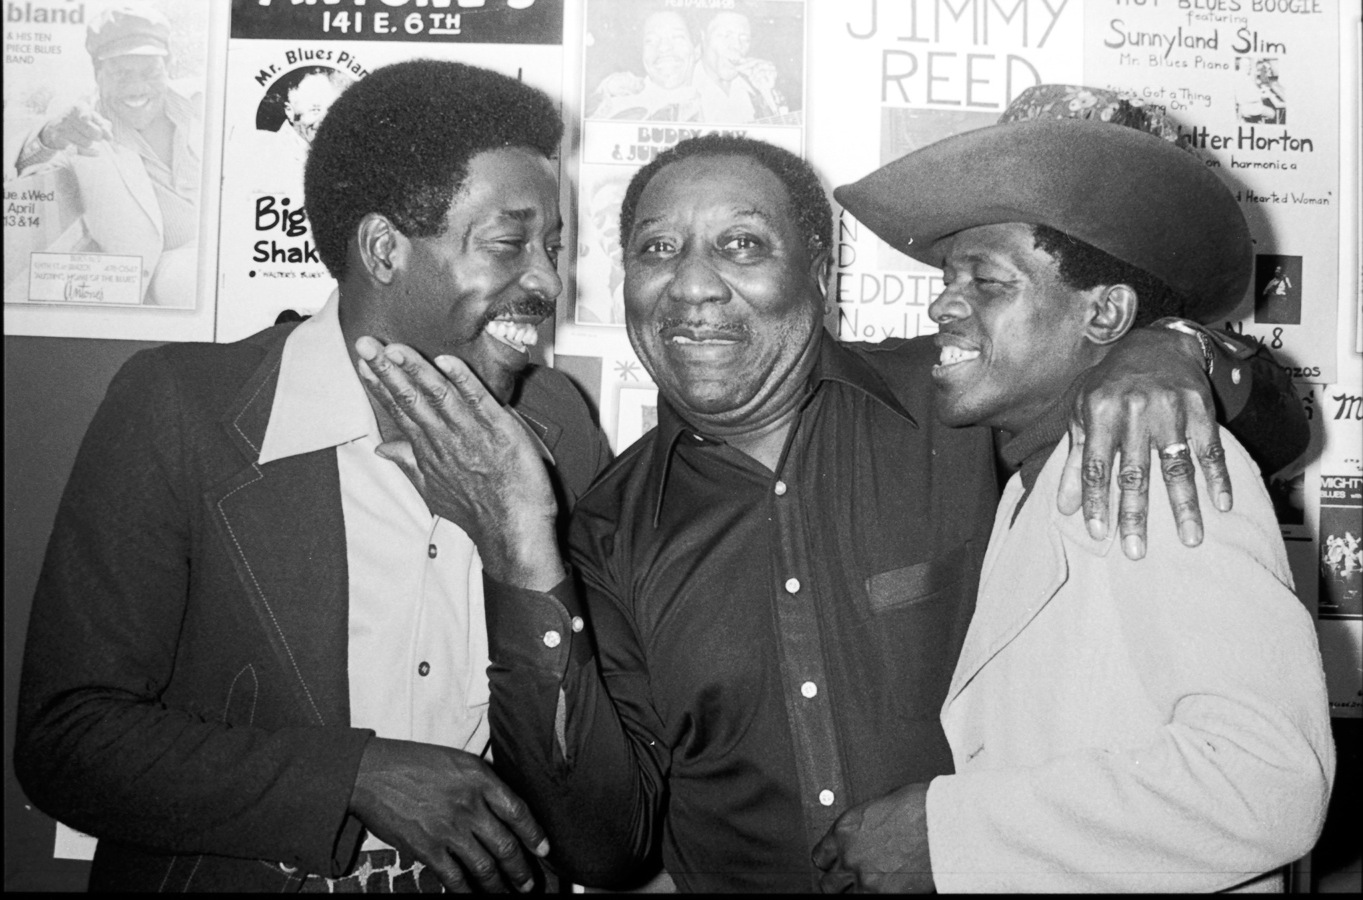 Buddy Guy, the Late Muddy Waters & the Late Jr. Wells (Muddy’s B’day).